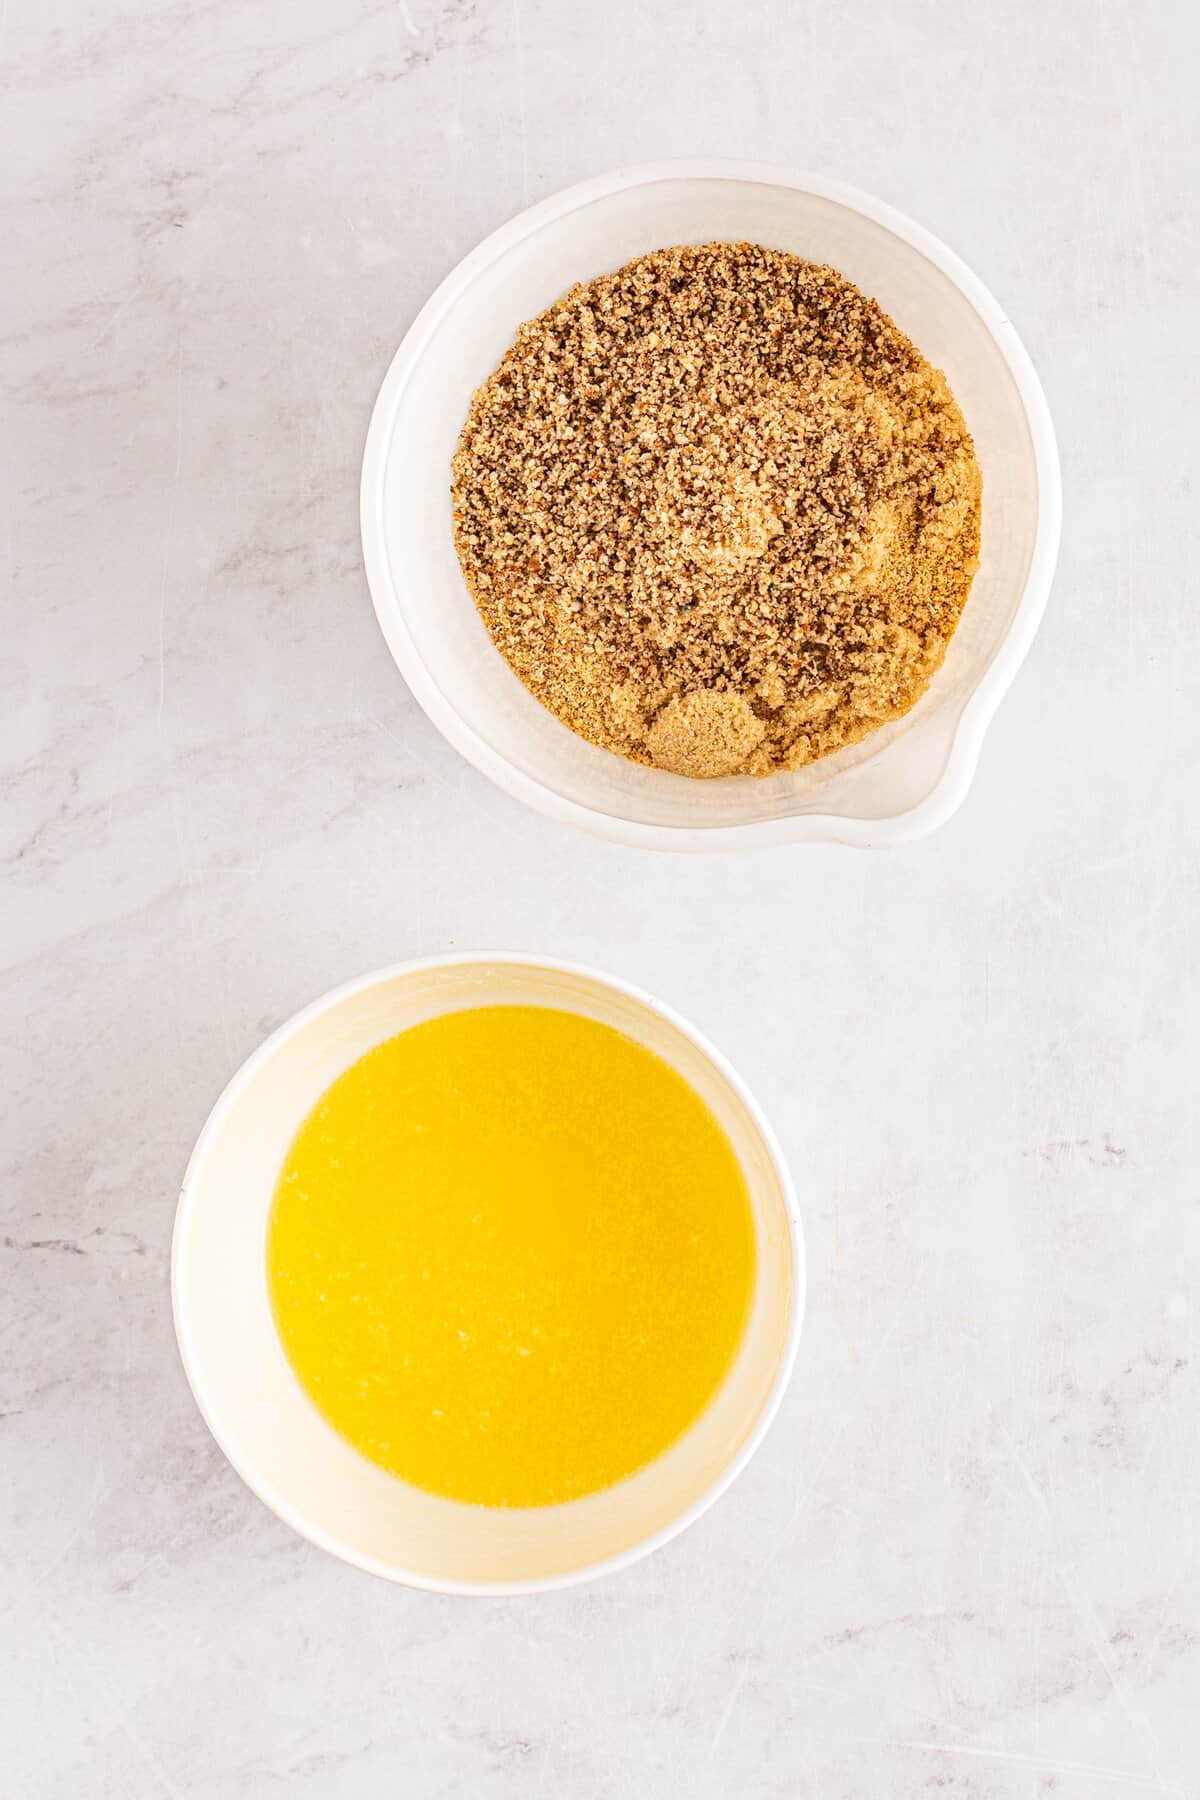 Bowls of melted butter and graham cracker crumbs